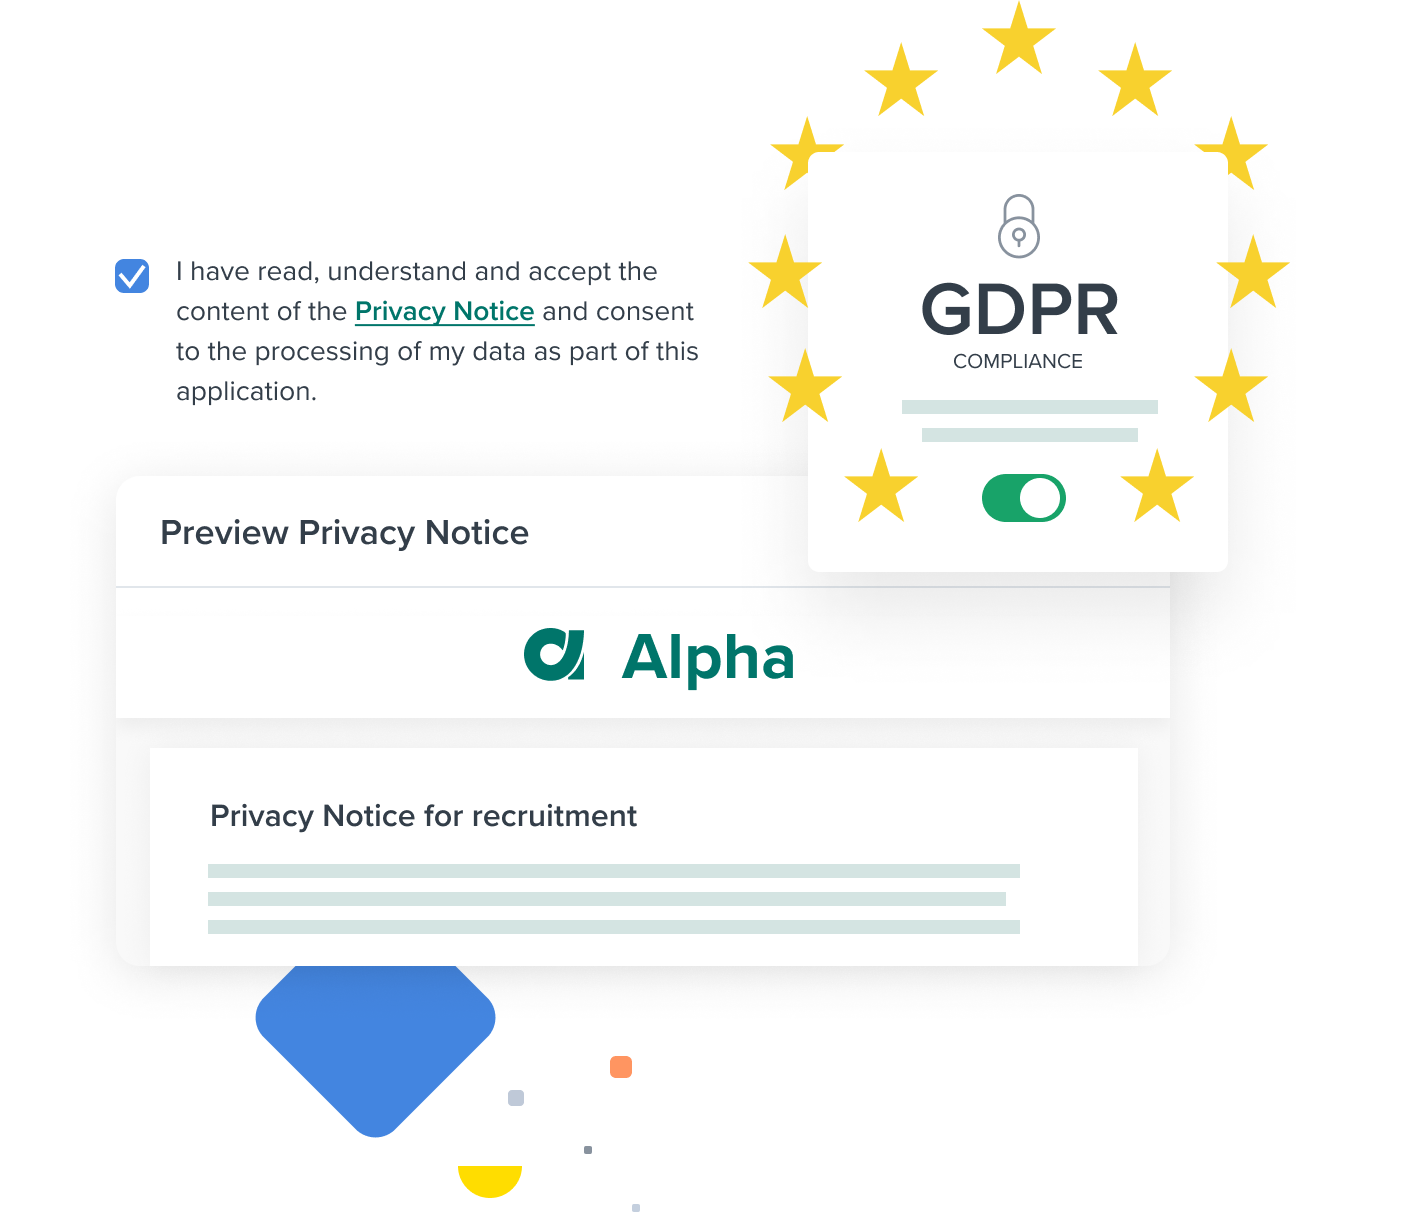 Automate your GDPR efforts